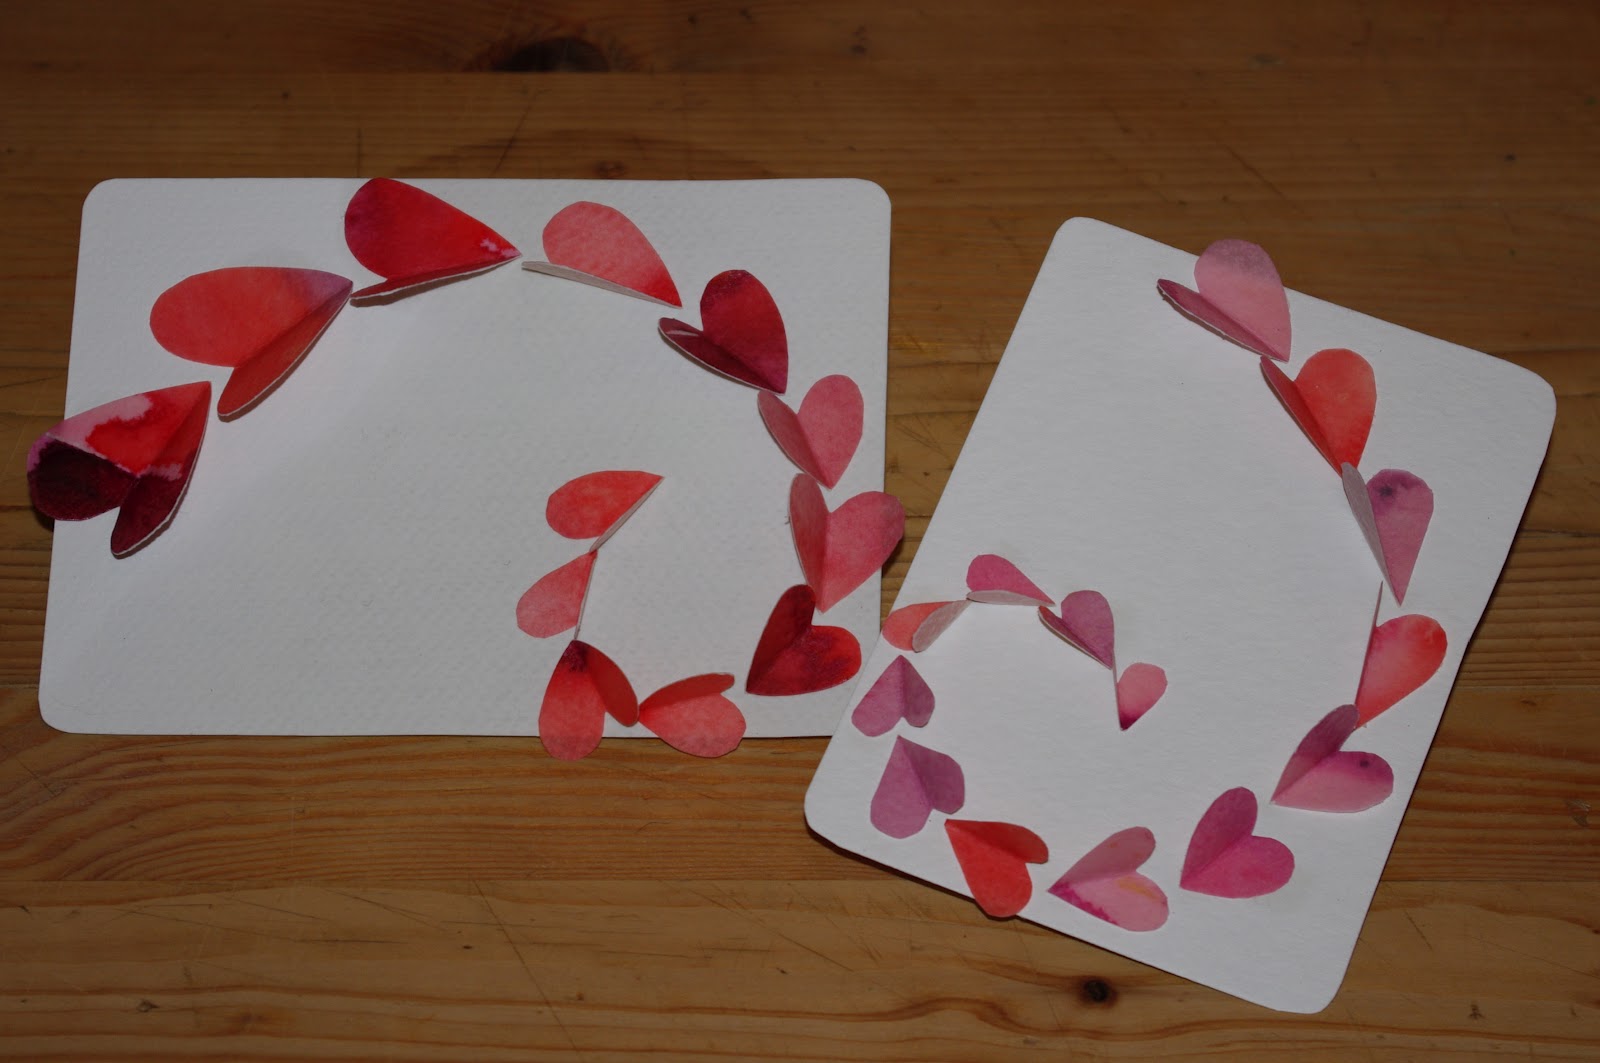 passengers on a little spaceship: making paper for valentines cards